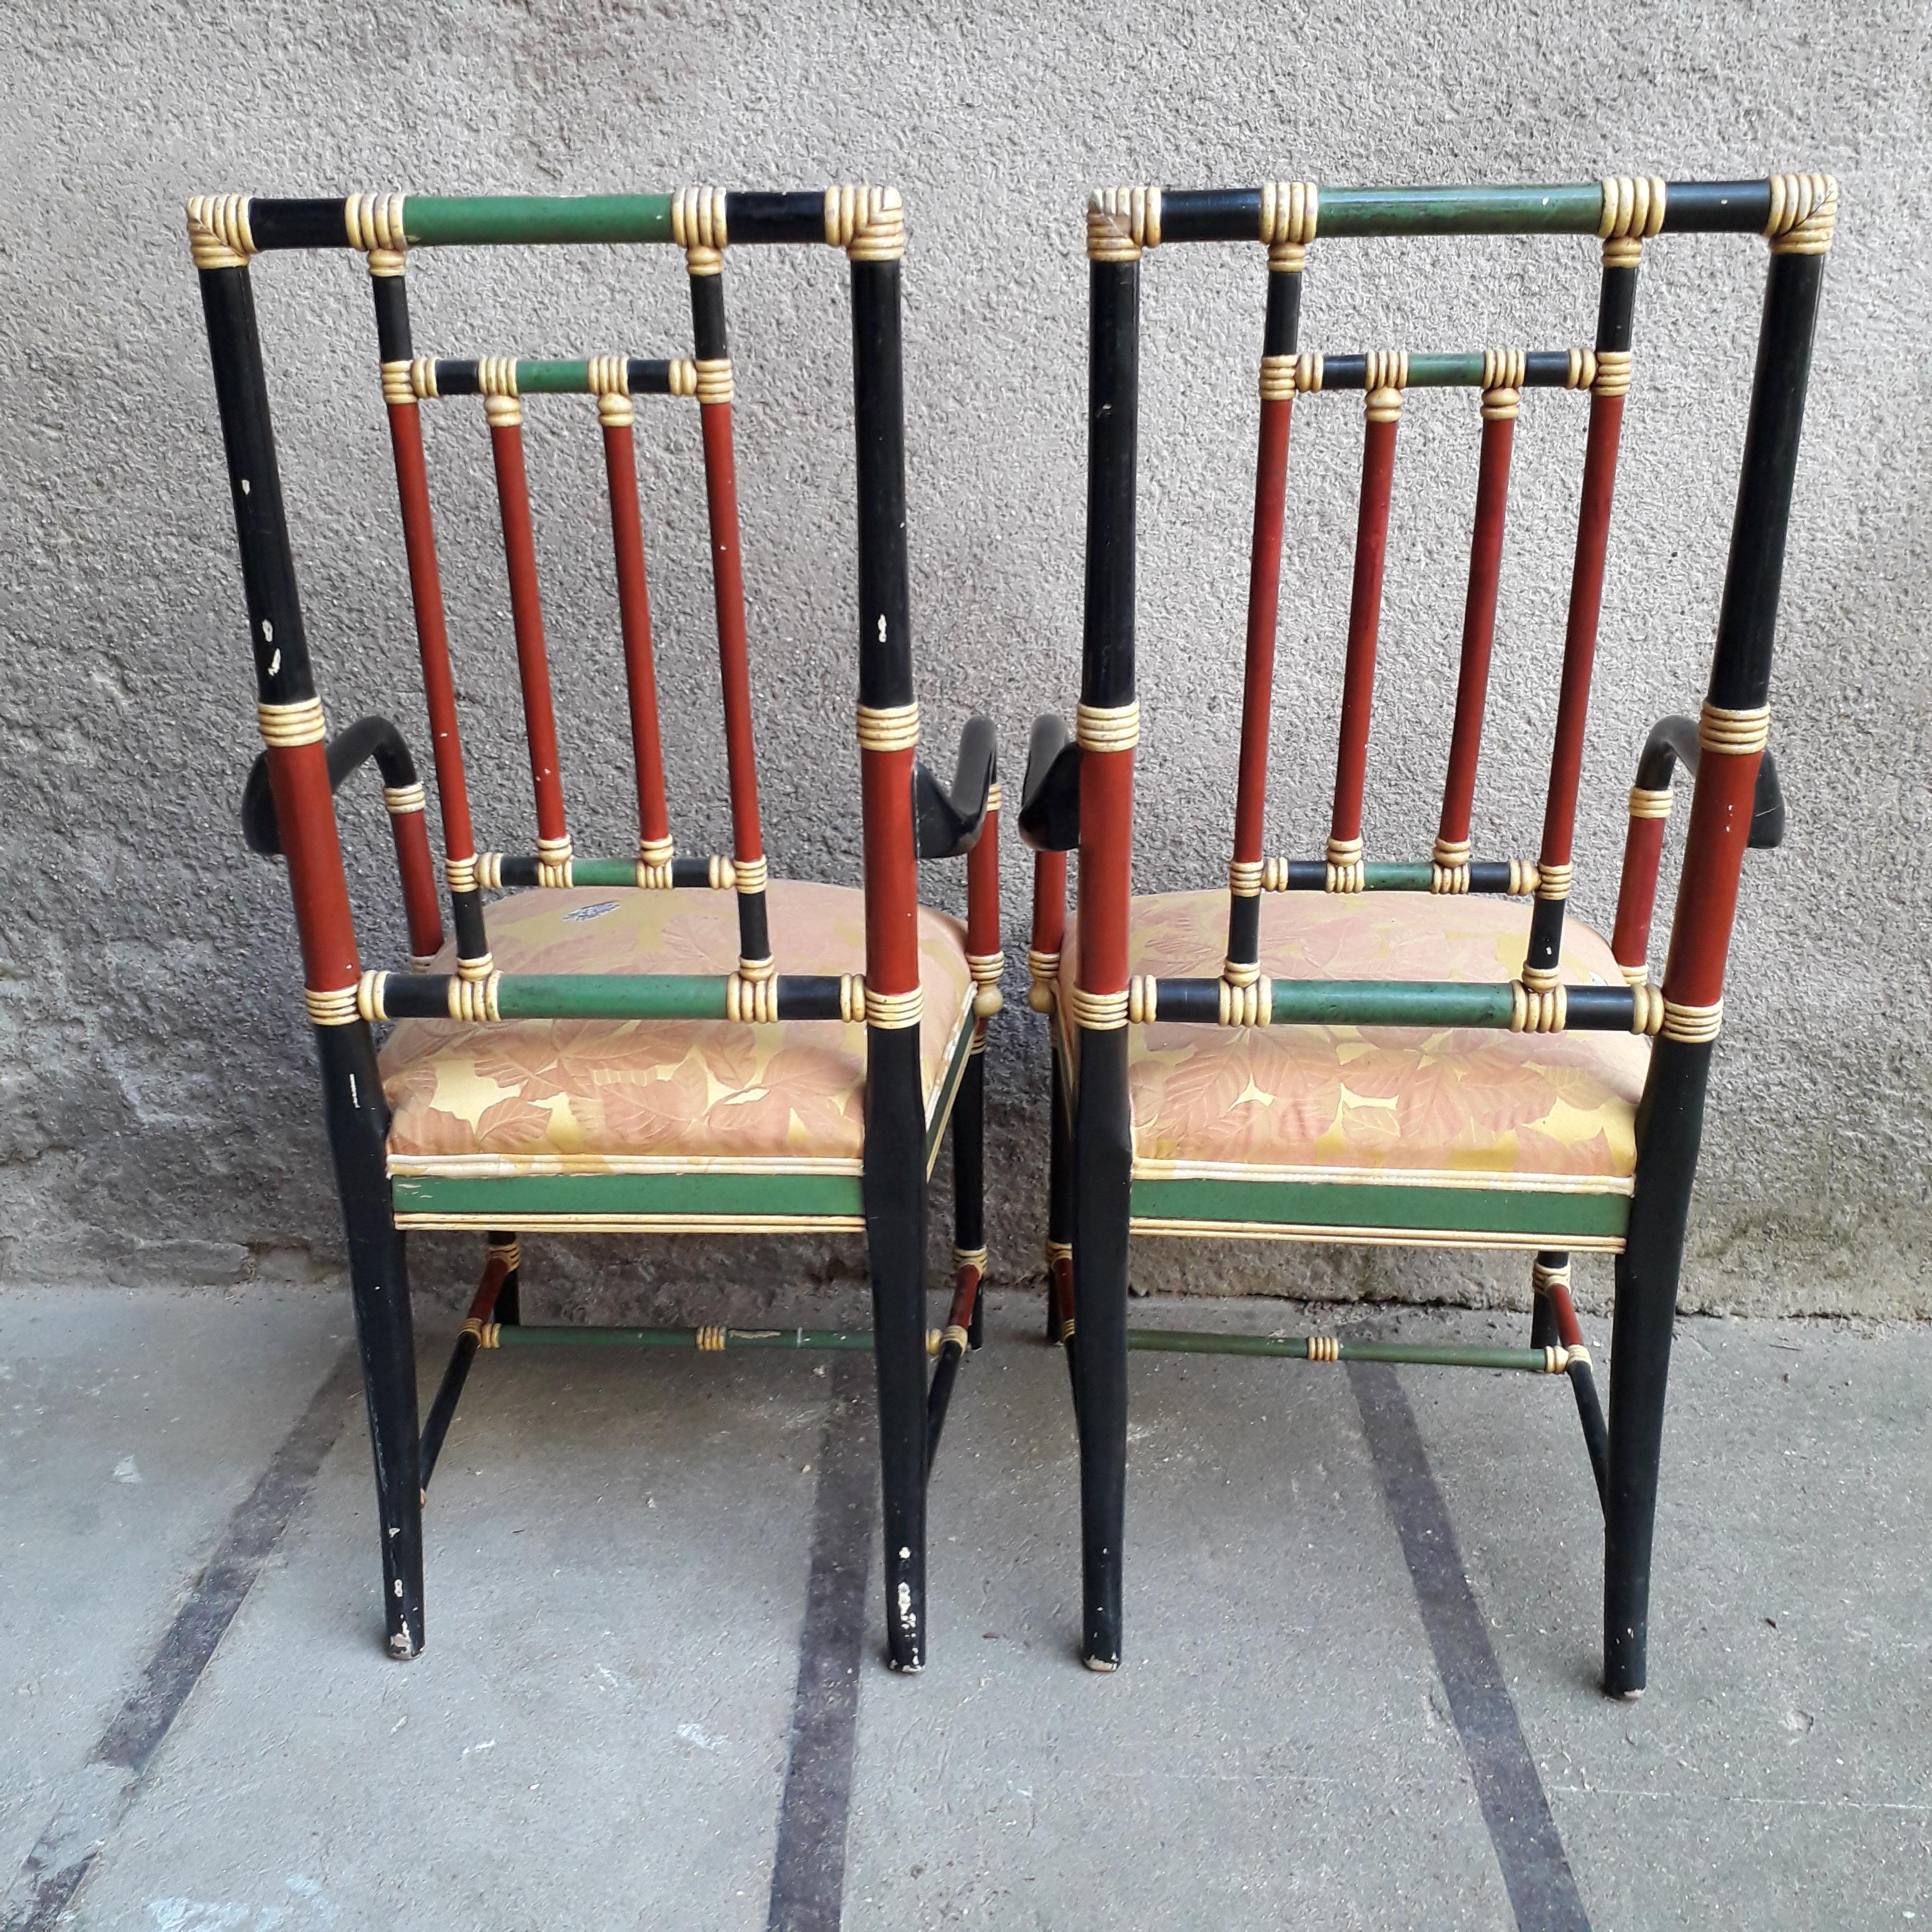 Pair of armchairs in the Chinese style of the Brigthon Pavilion.
Seat in fabrics, upholstery in good condition. No structural problem.
Worn patina with some chips on the feet and the armrests.
20th century
Measures: Height 107 cm, width 55 cm,